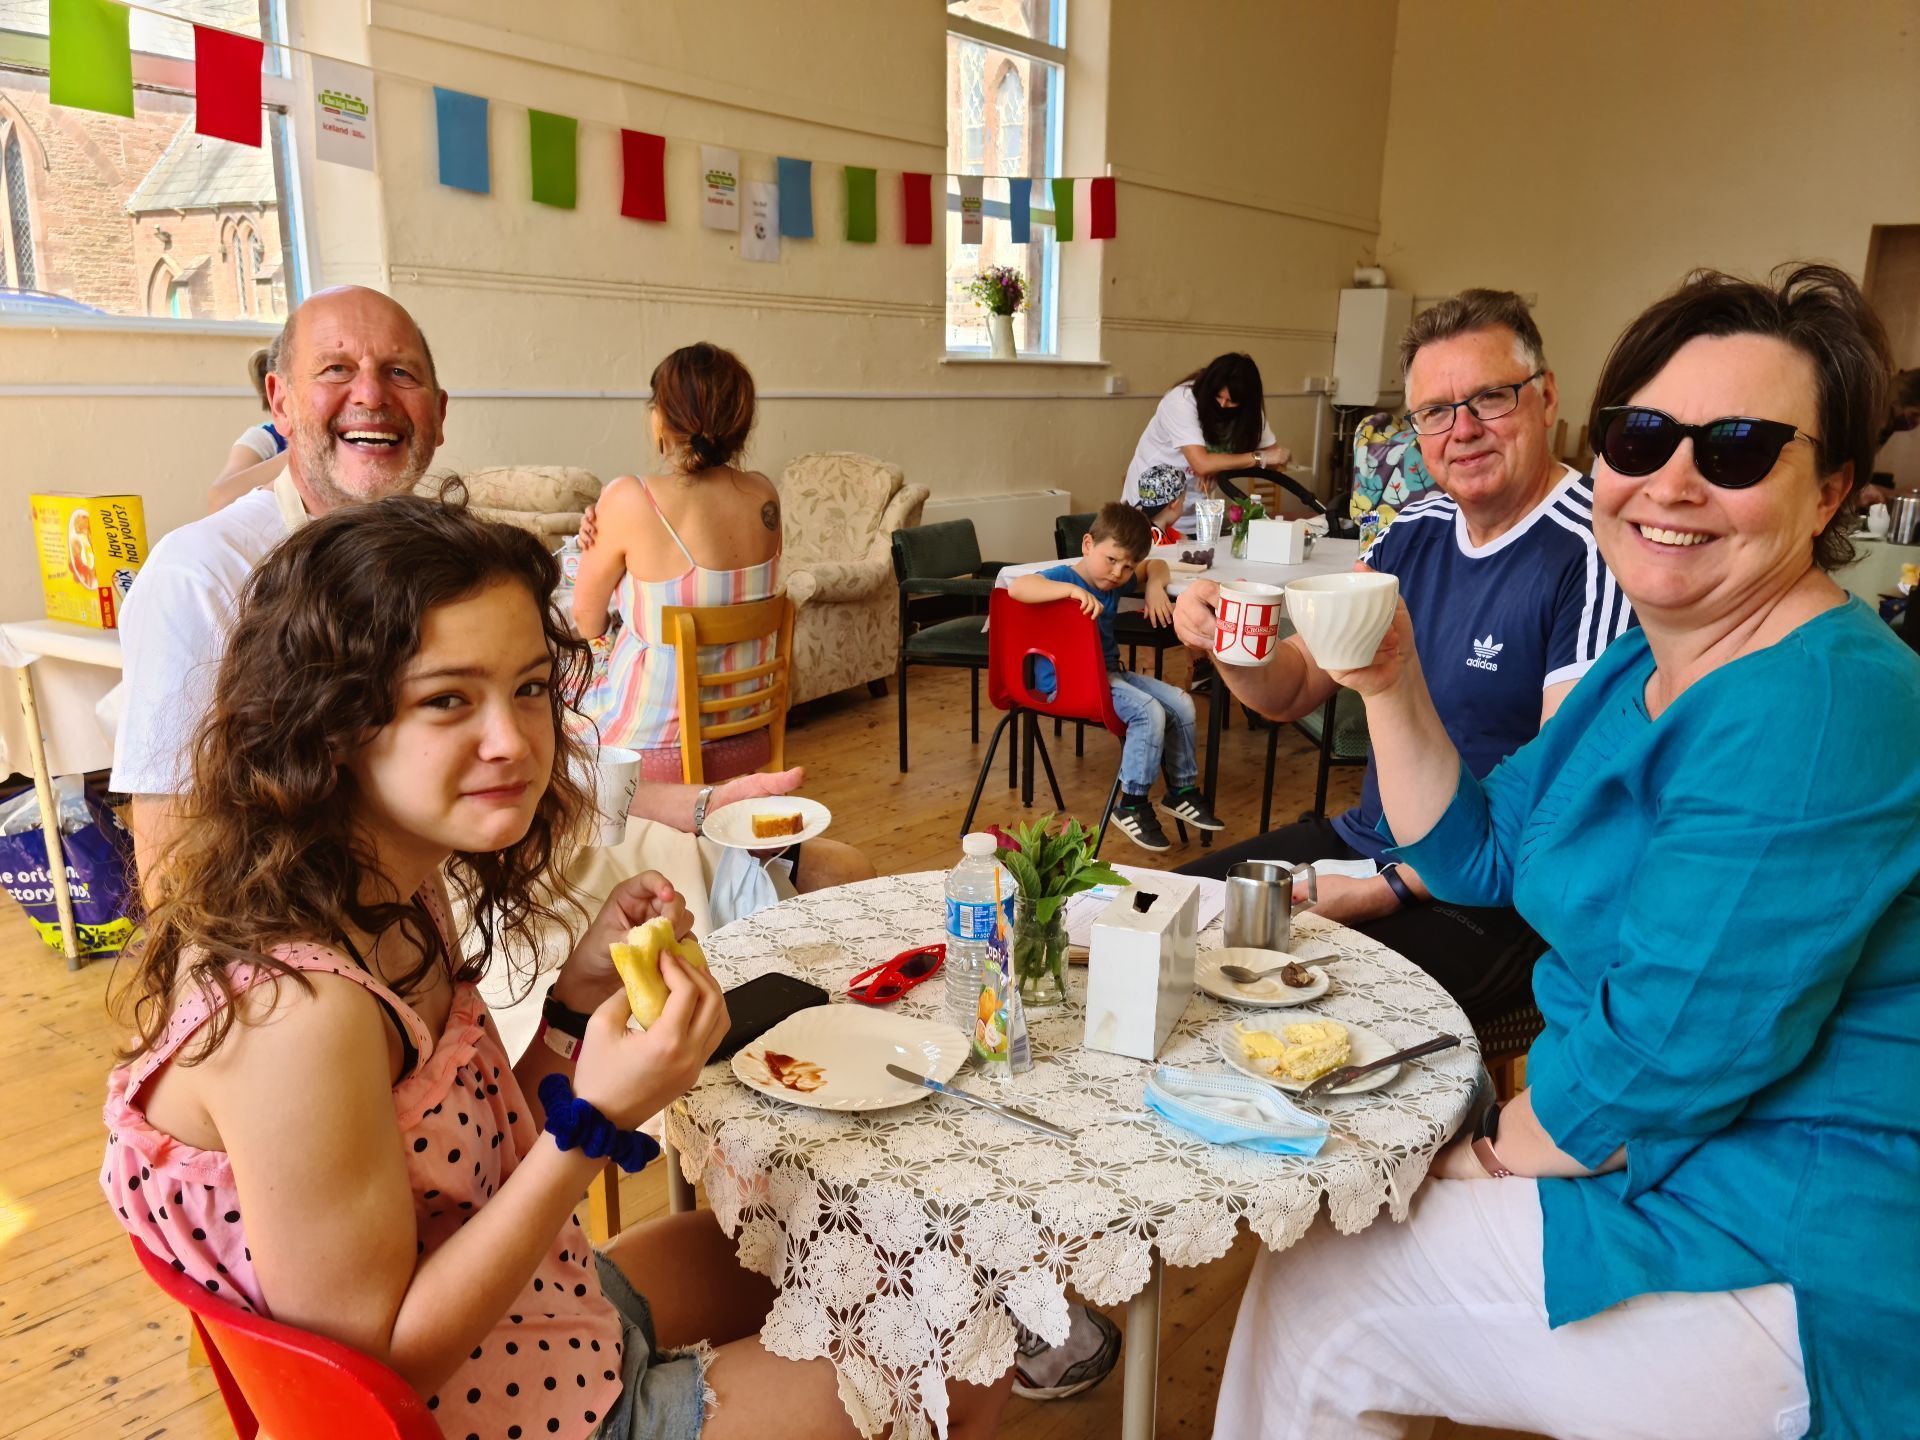 A group of people sitting at a table in a church hall, sharing drinks and food together. There is bunting up in the background and everyone is smiling